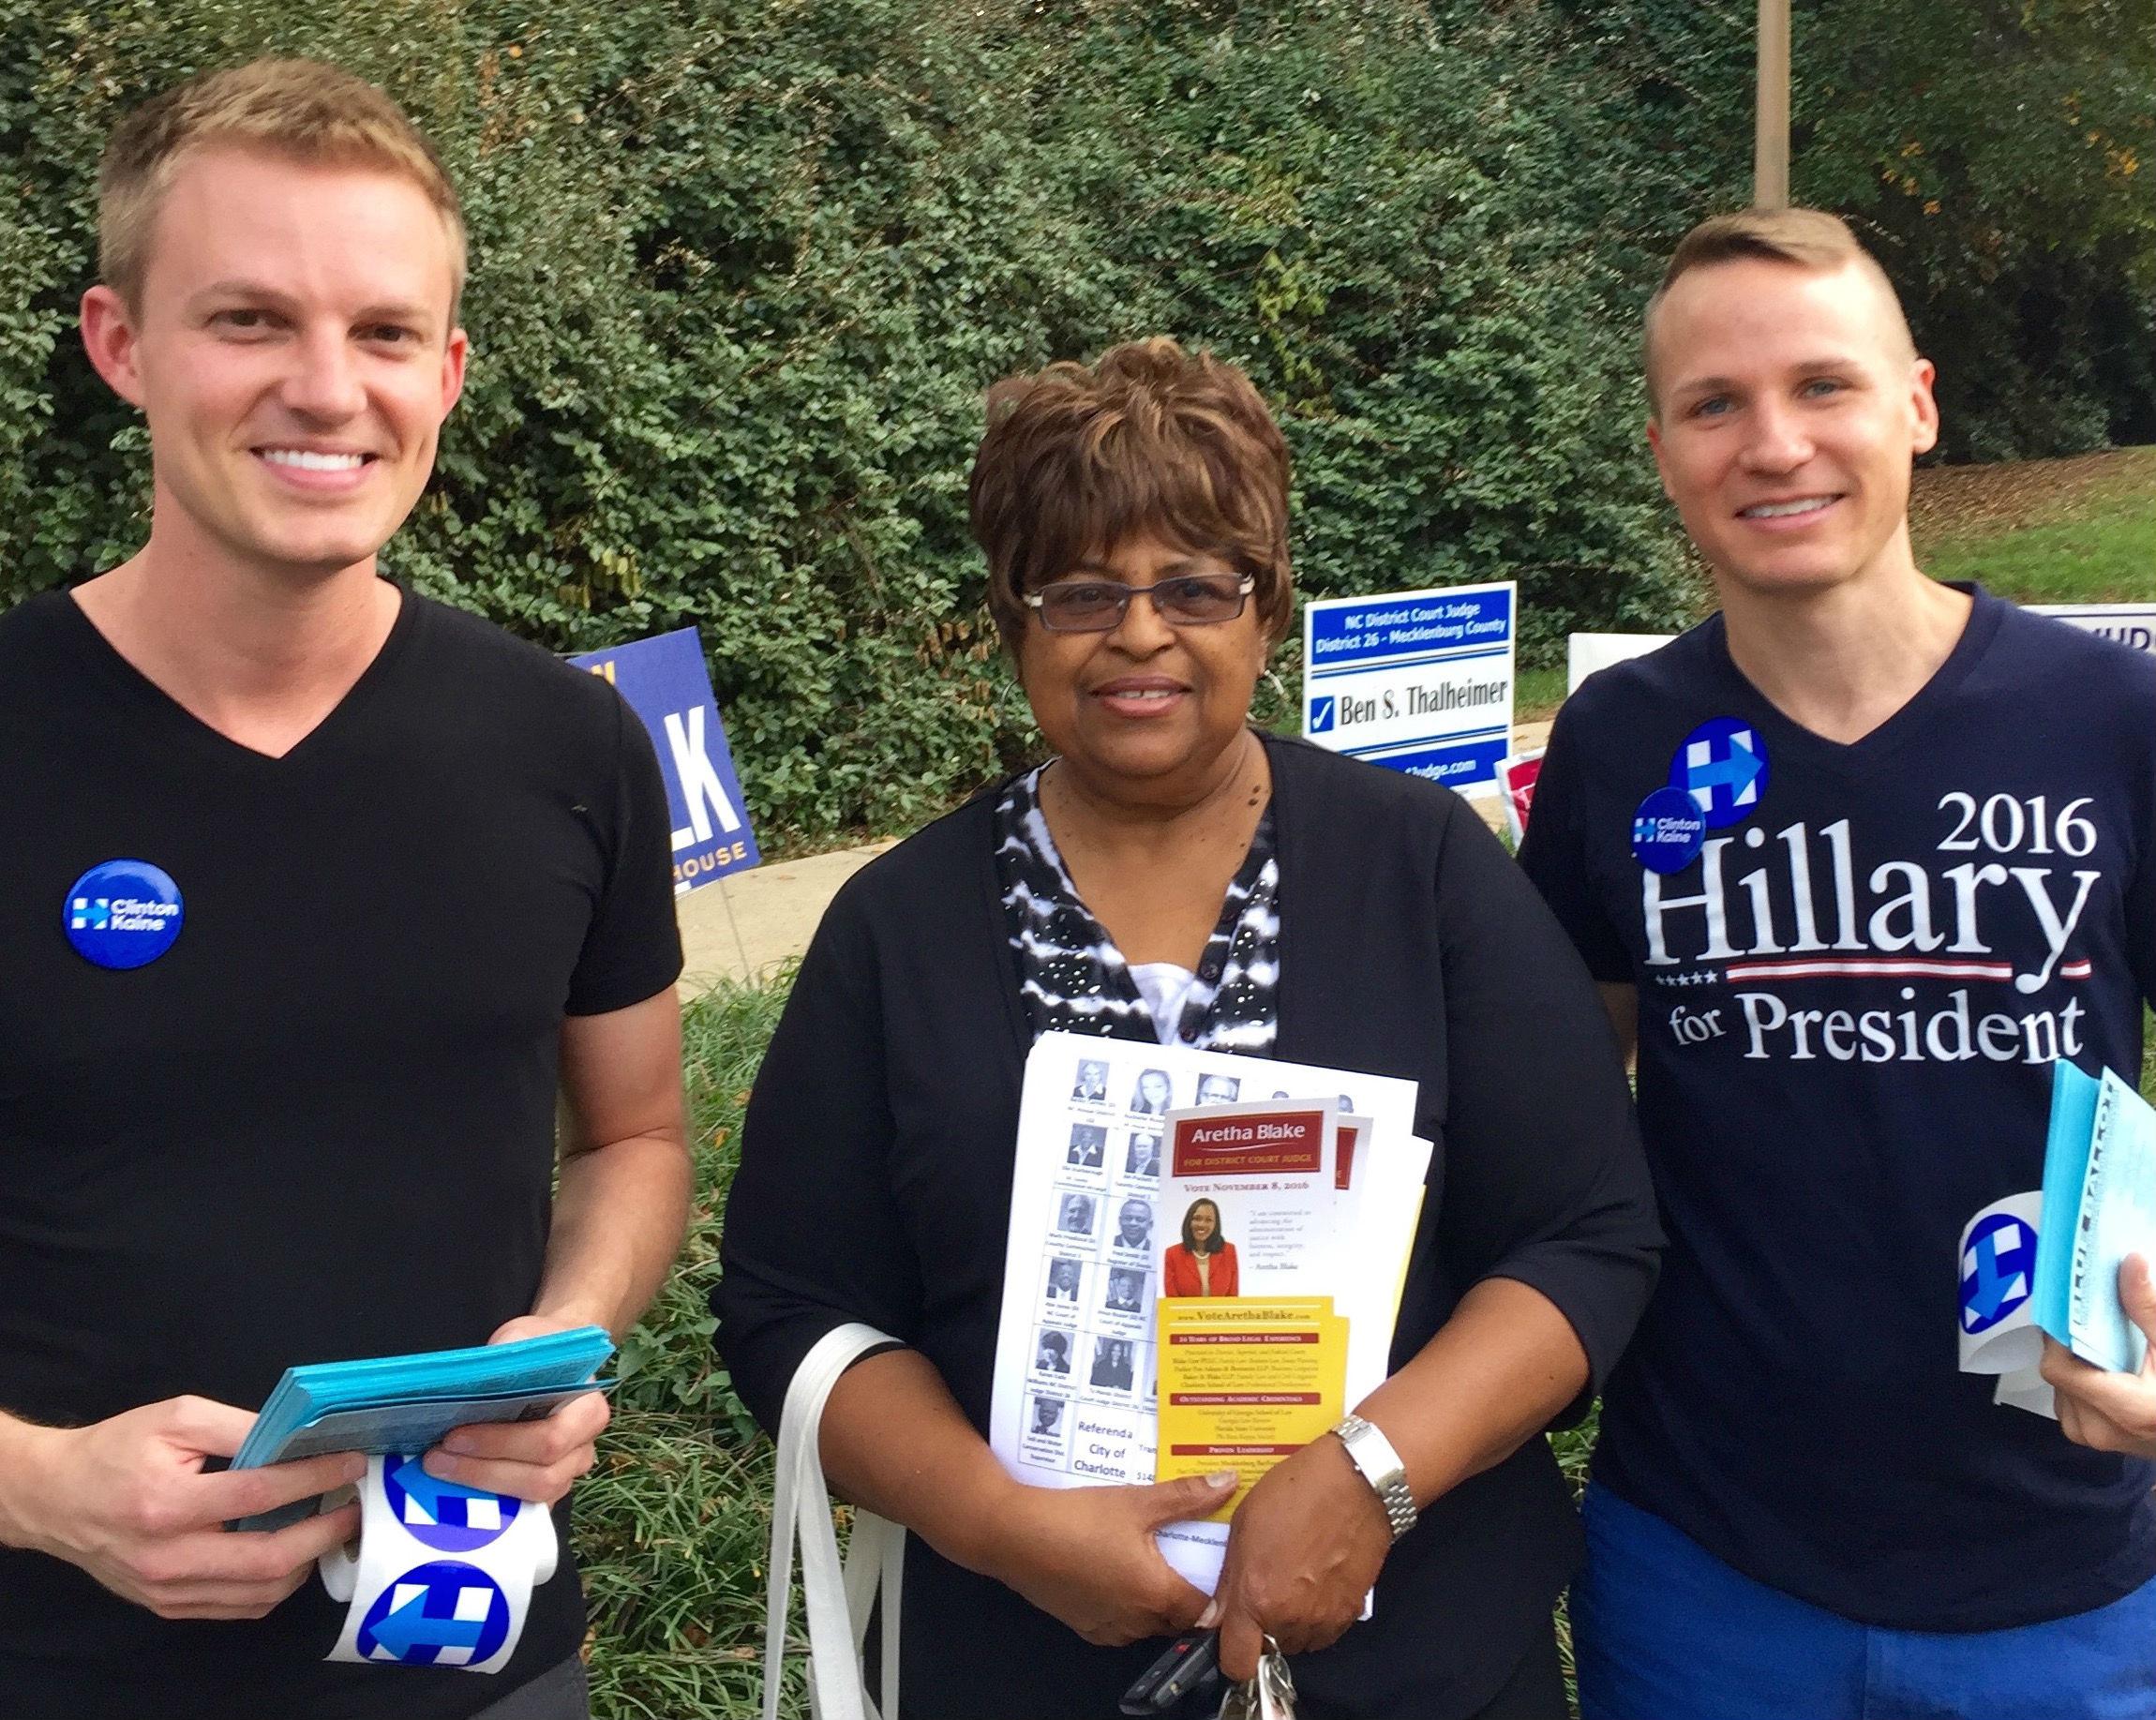 Supporters of Hillary Clinton at Charlotte’s West Boulevard Library